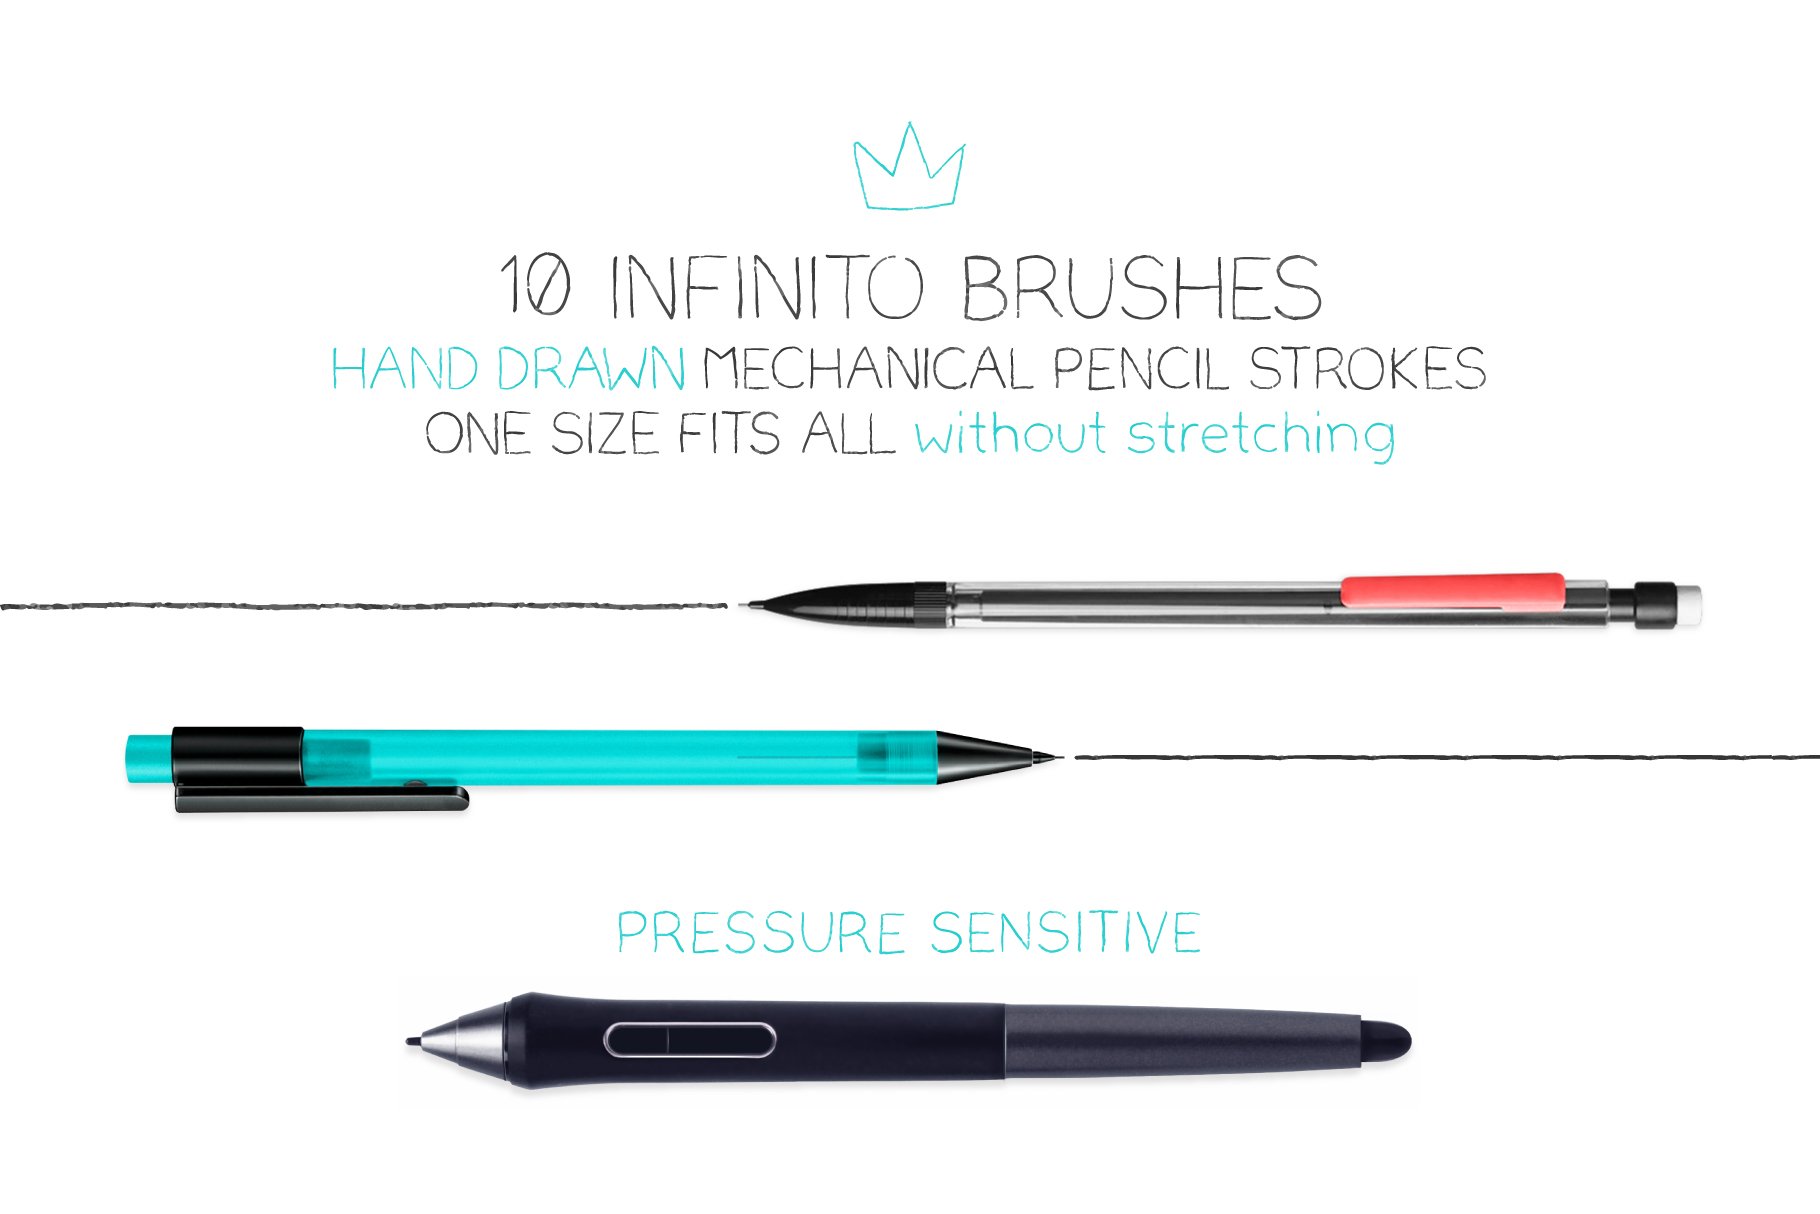 mechanical pencil brushes preview 00 shop infinito 566